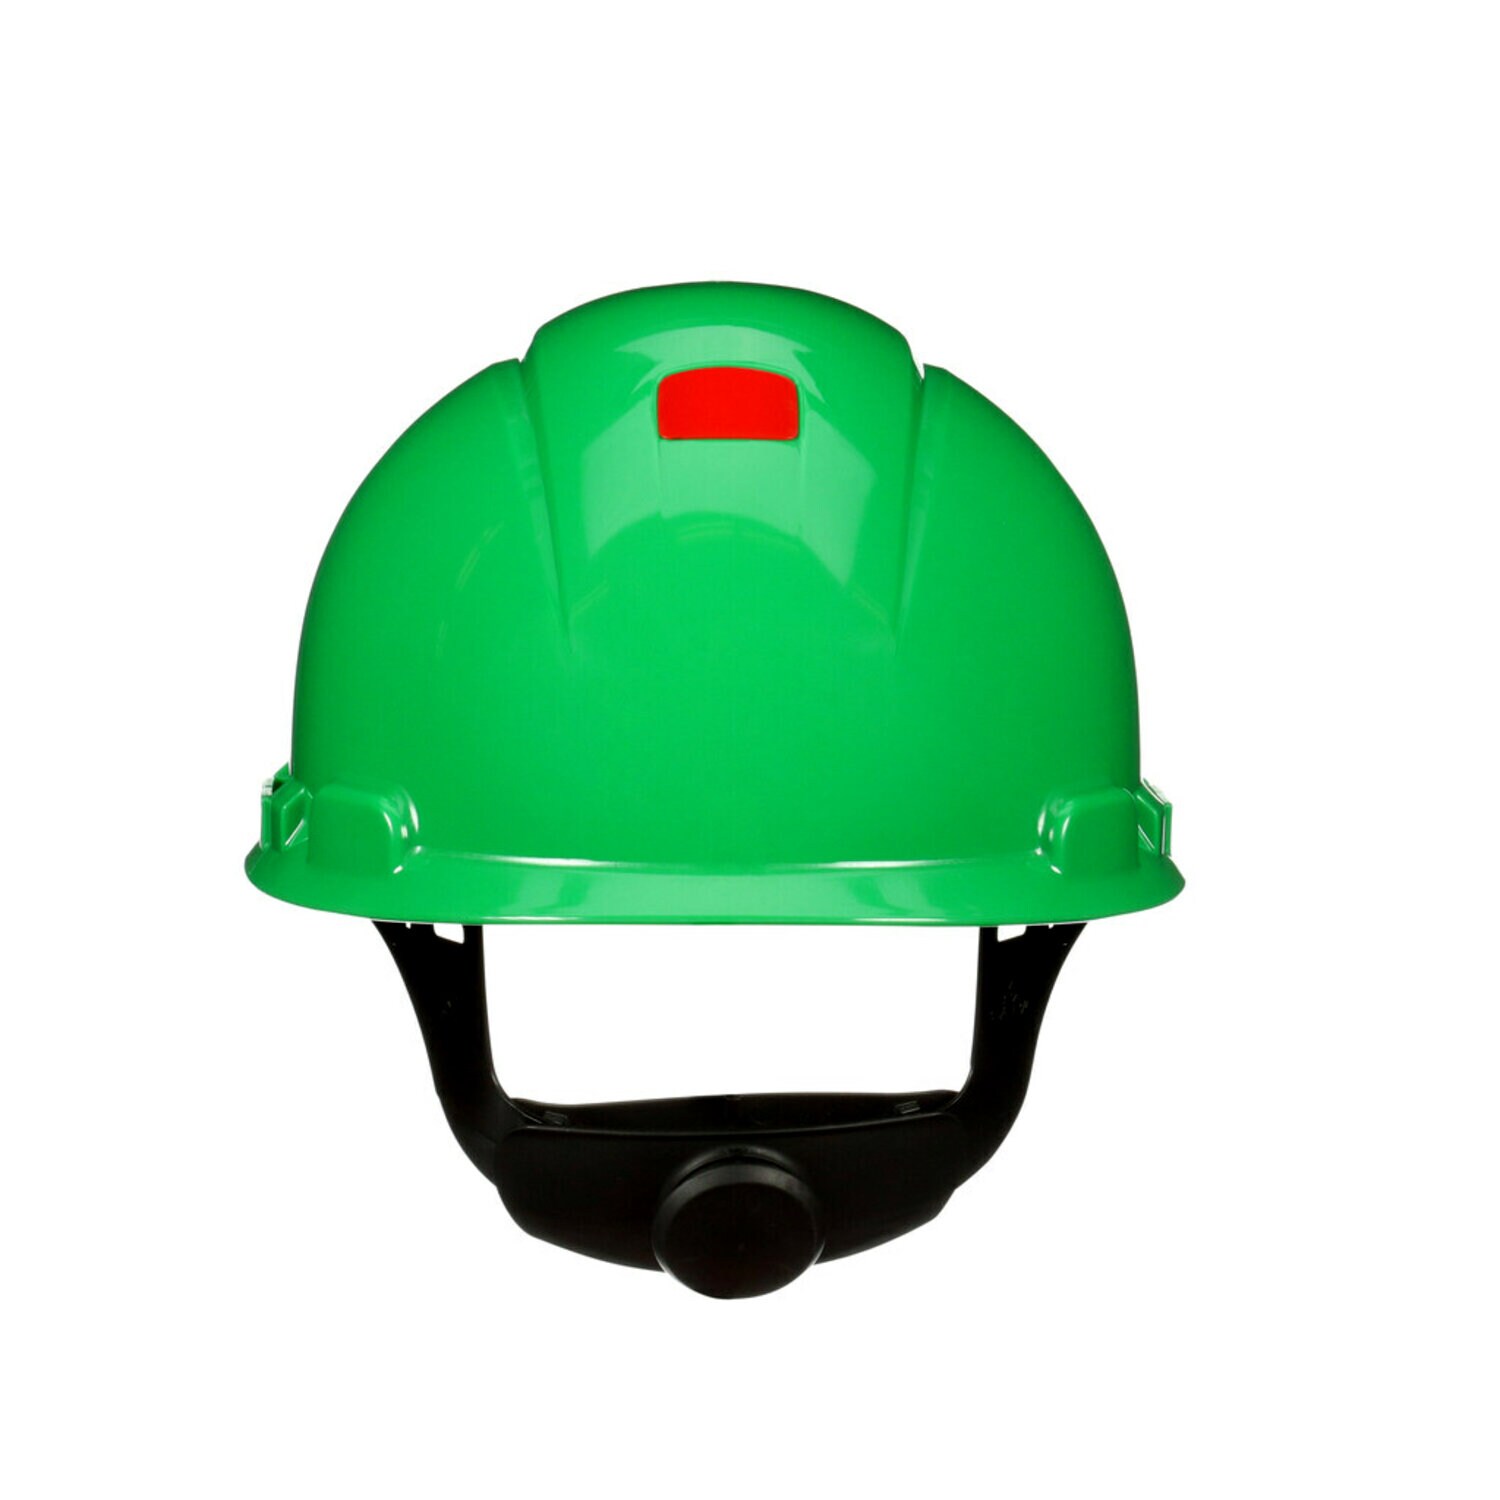 7100239994 - 3M SecureFit Hard Hat H-704SFR-UV, Green, 4-Point Pressure Diffusion Ratchet Suspension, with UVicator, 20 ea/Case